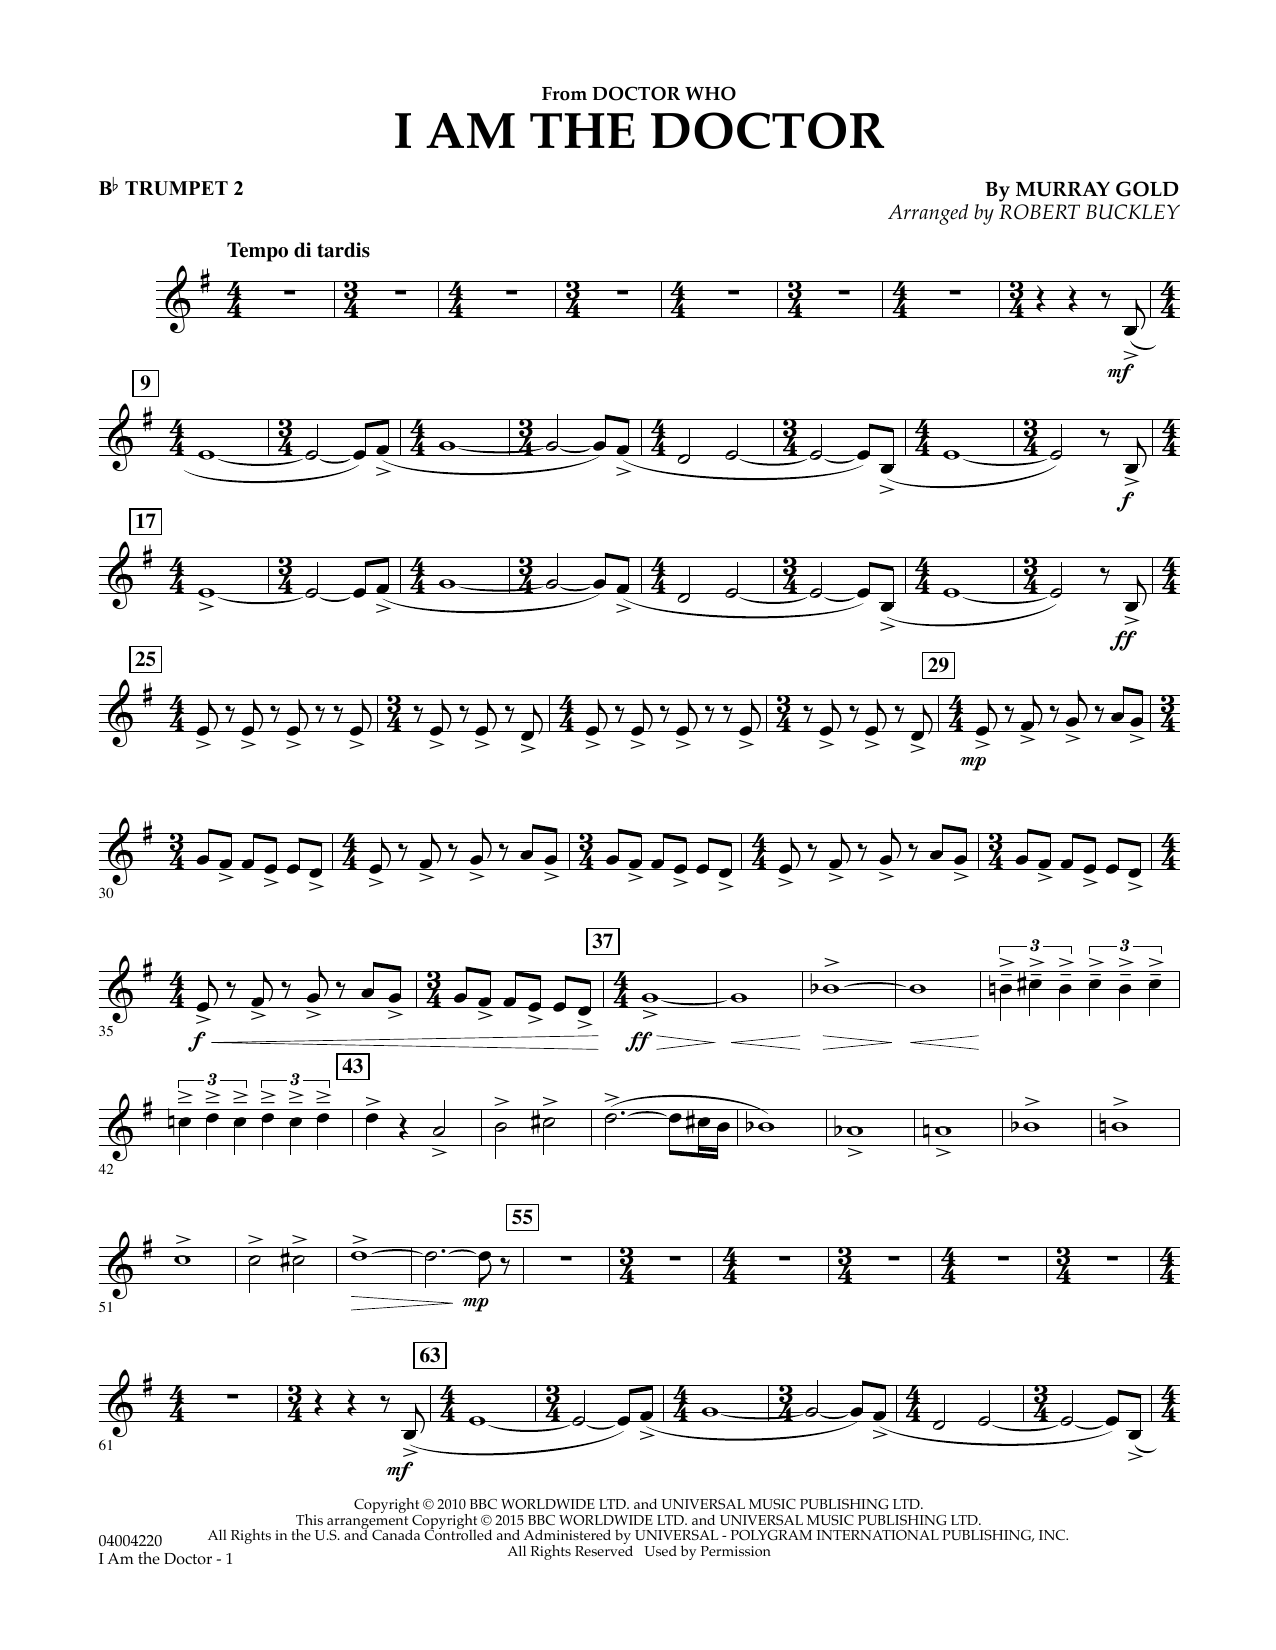 Robert Buckley I Am the Doctor (from Doctor Who) - Bb Trumpet 2 sheet music notes and chords. Download Printable PDF.